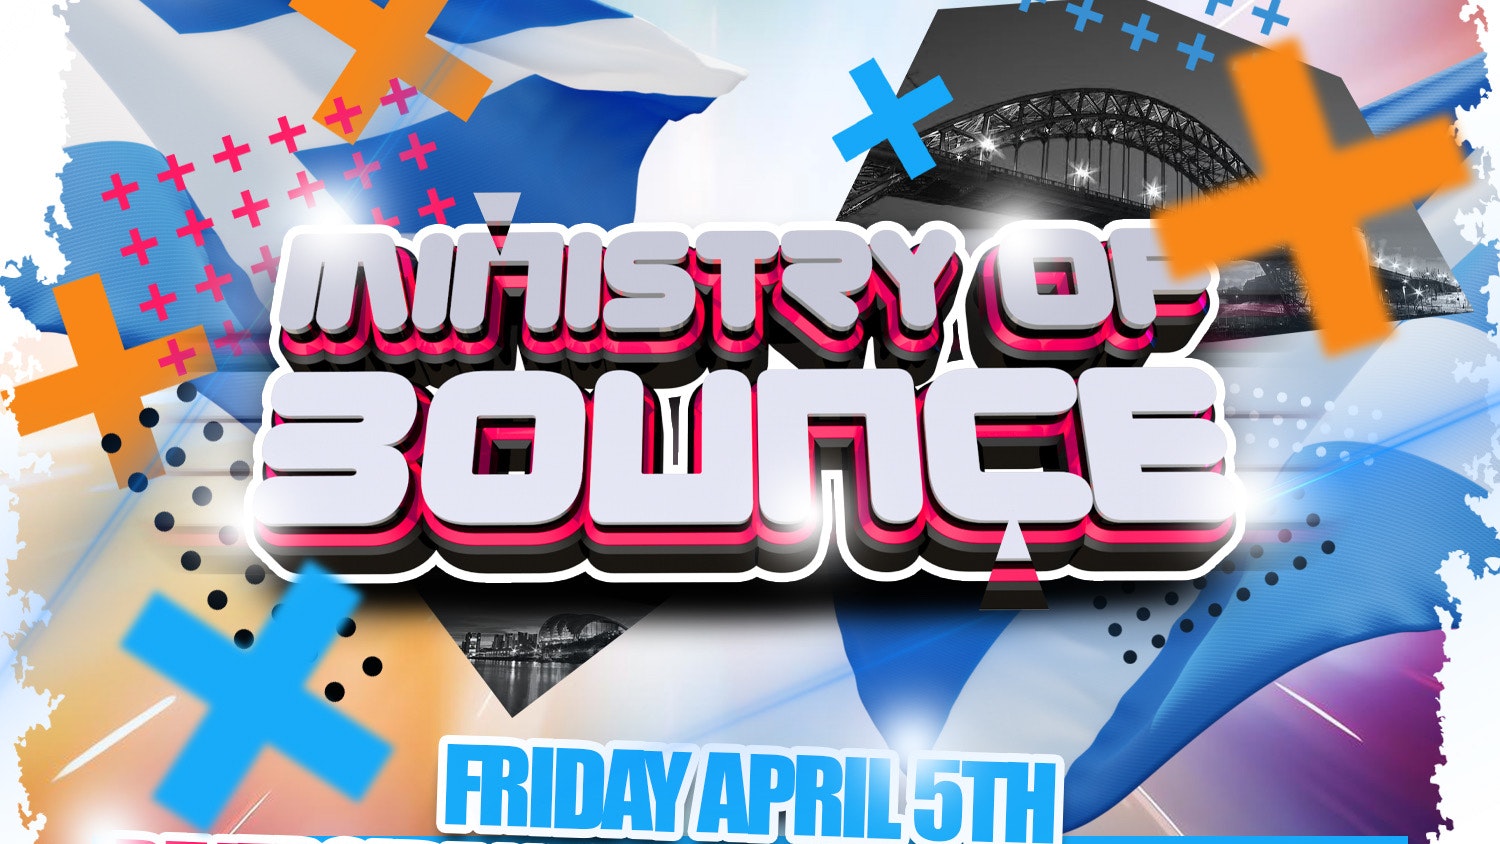 Ministry of Bounce